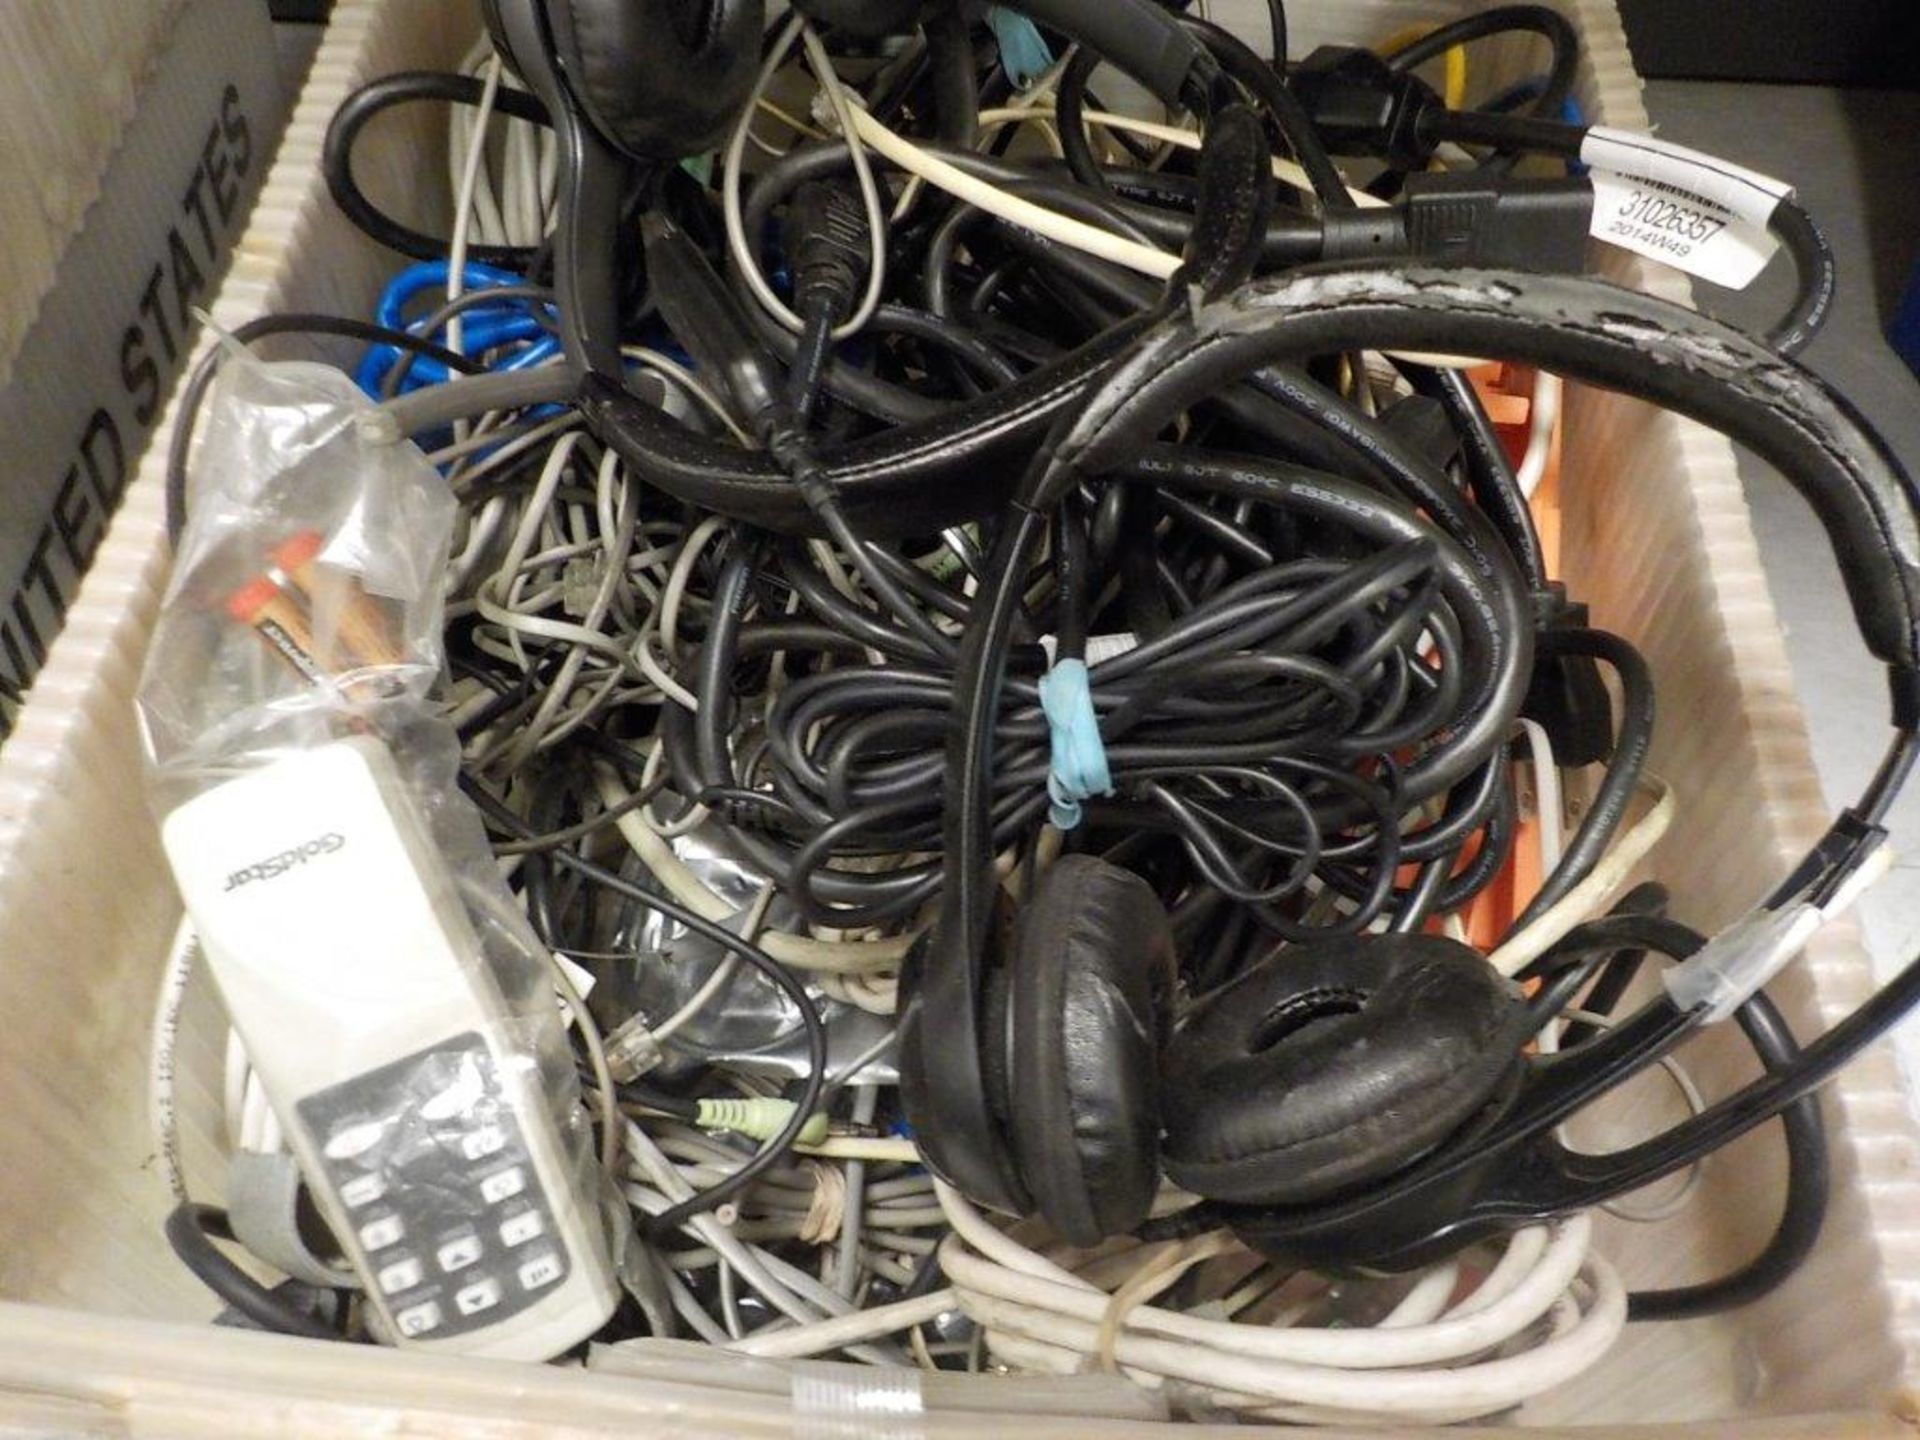 LOT: BOX OF ASSORTED COMPUTER WIRES, ETC.